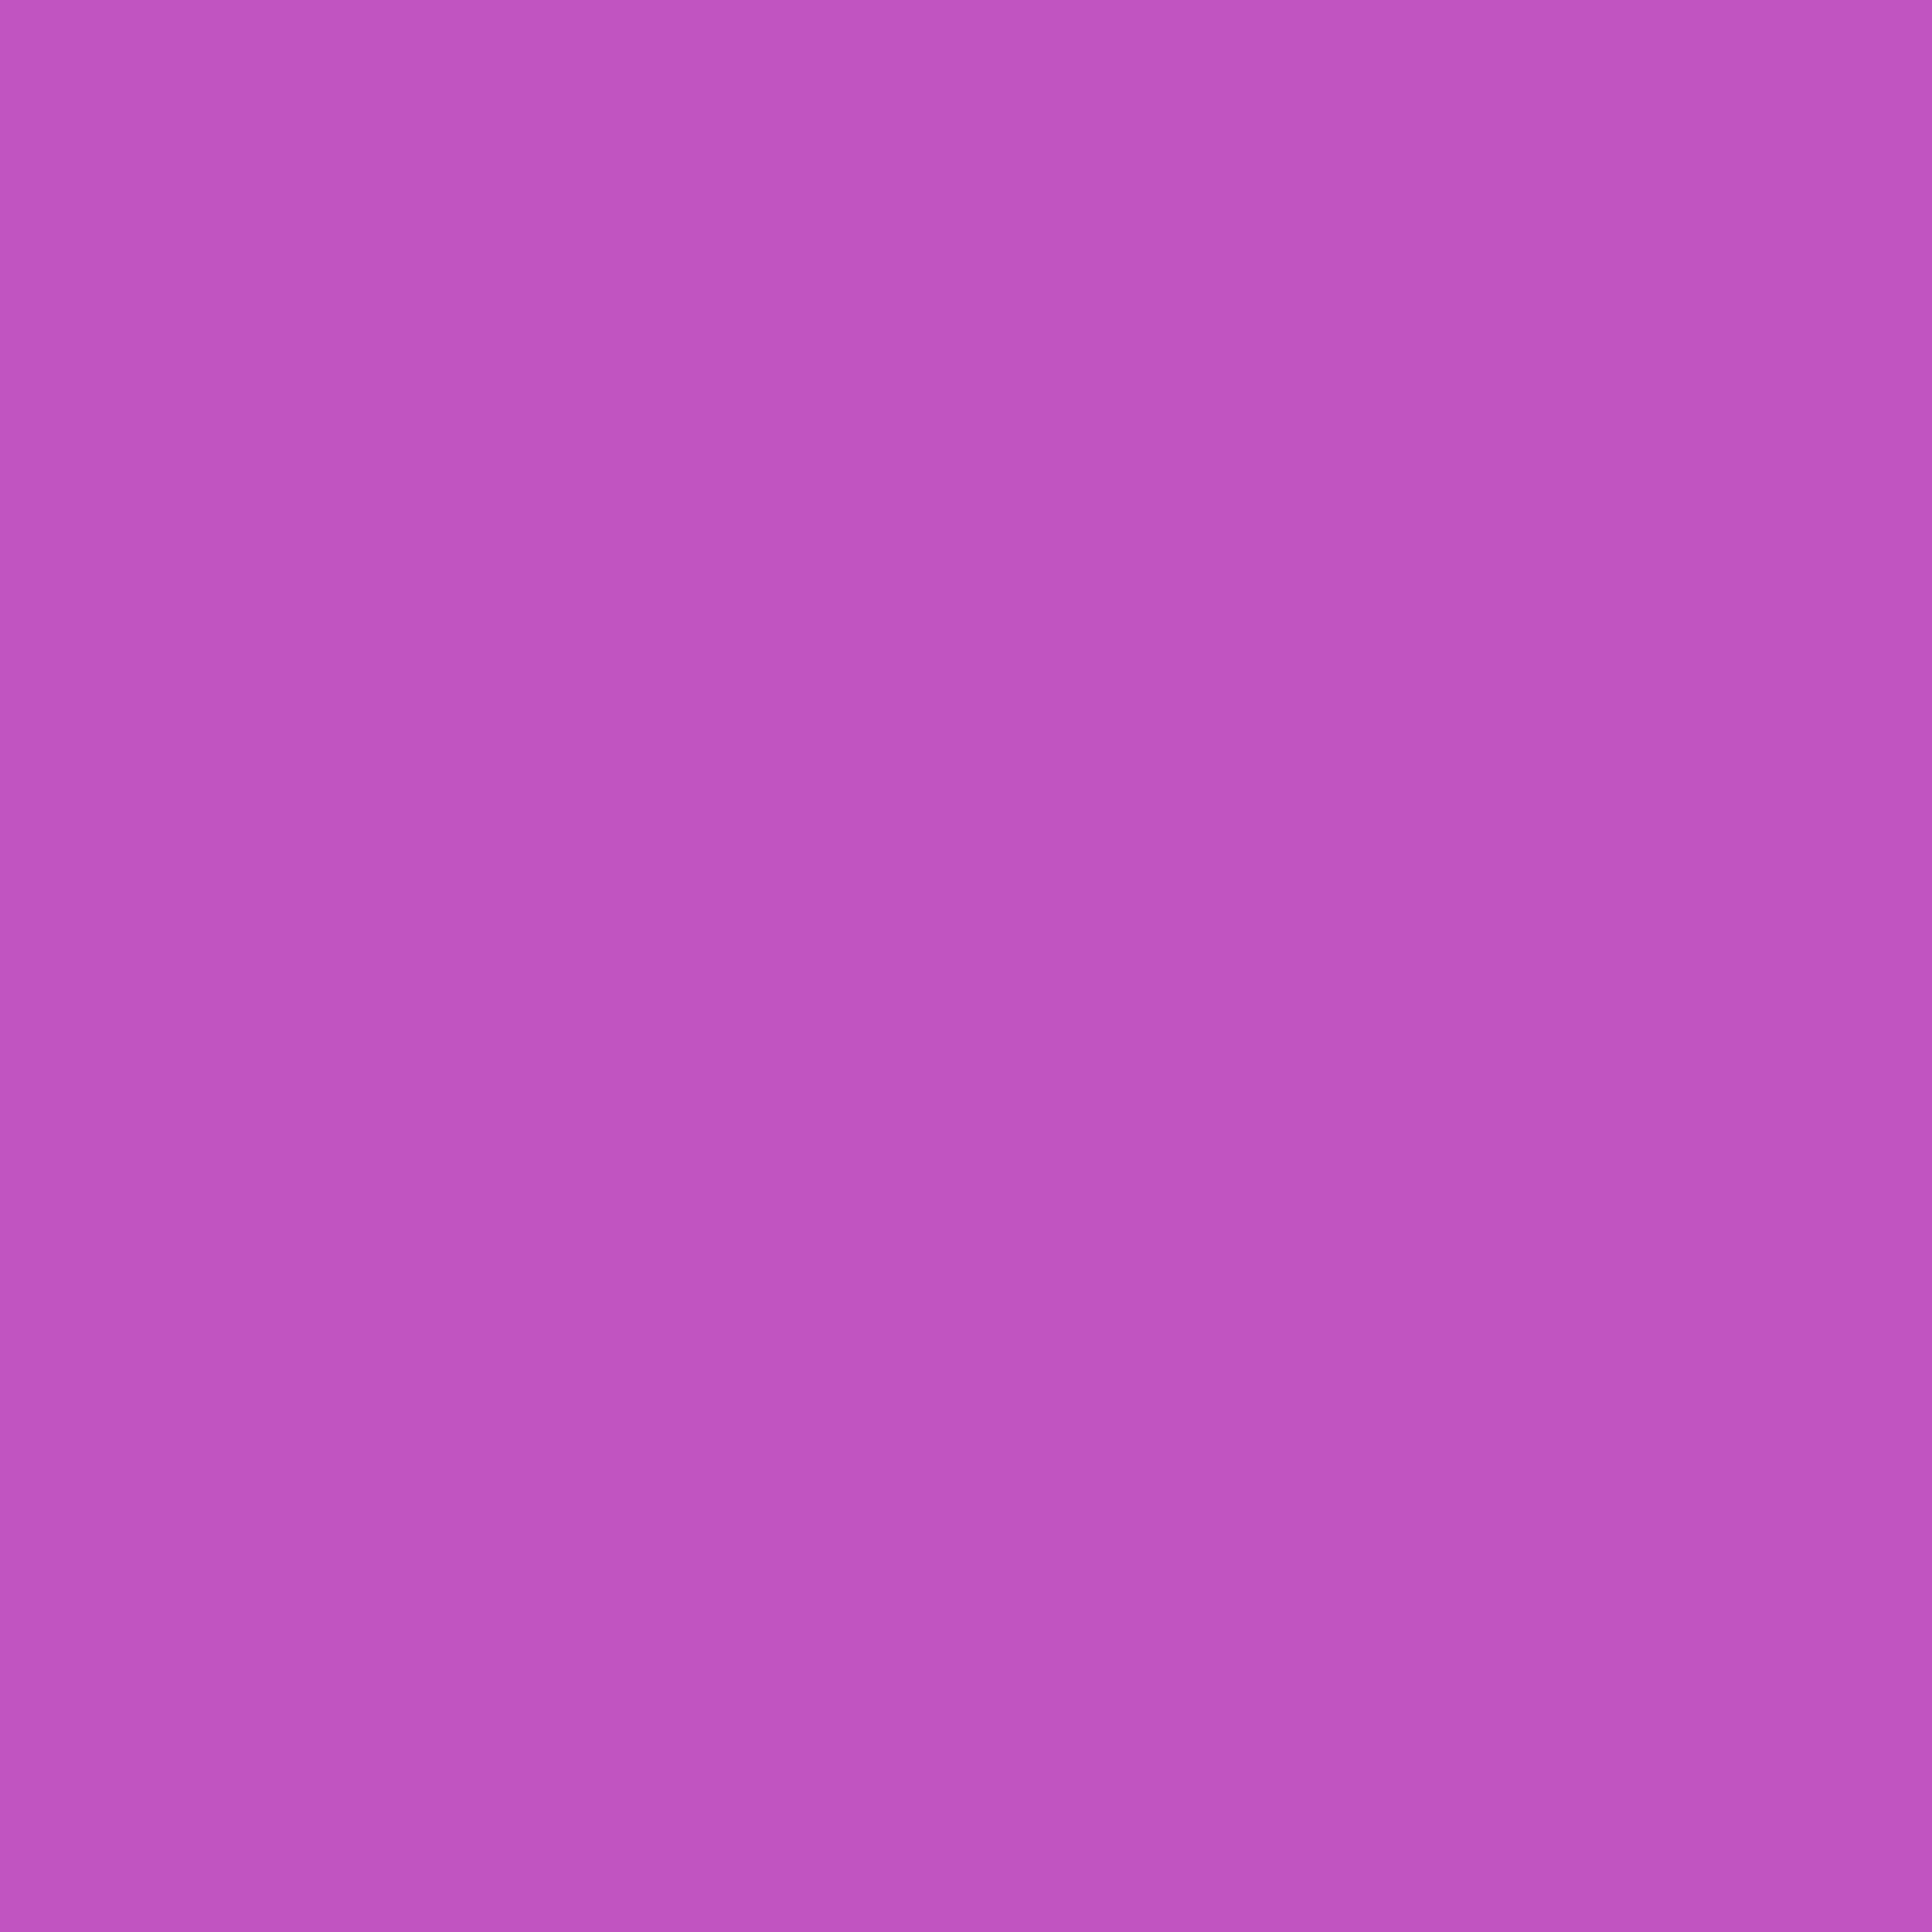 2048x2048 Deep Fuchsia Solid Color Background